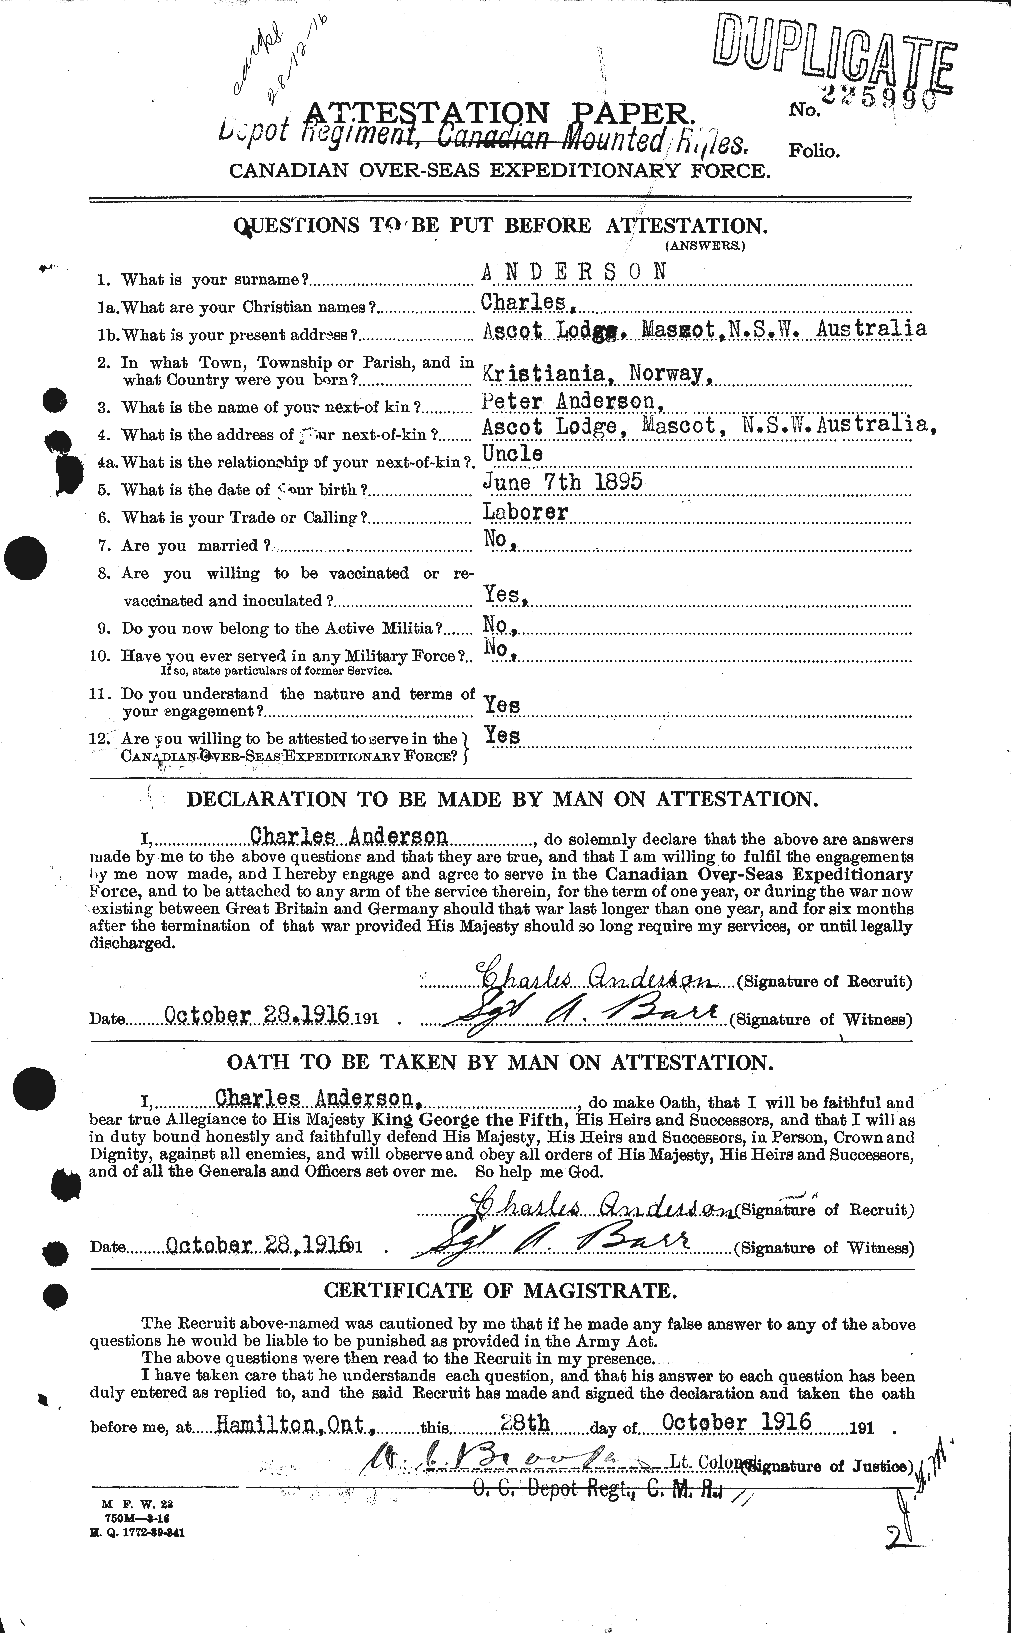 Personnel Records of the First World War - CEF 209258a